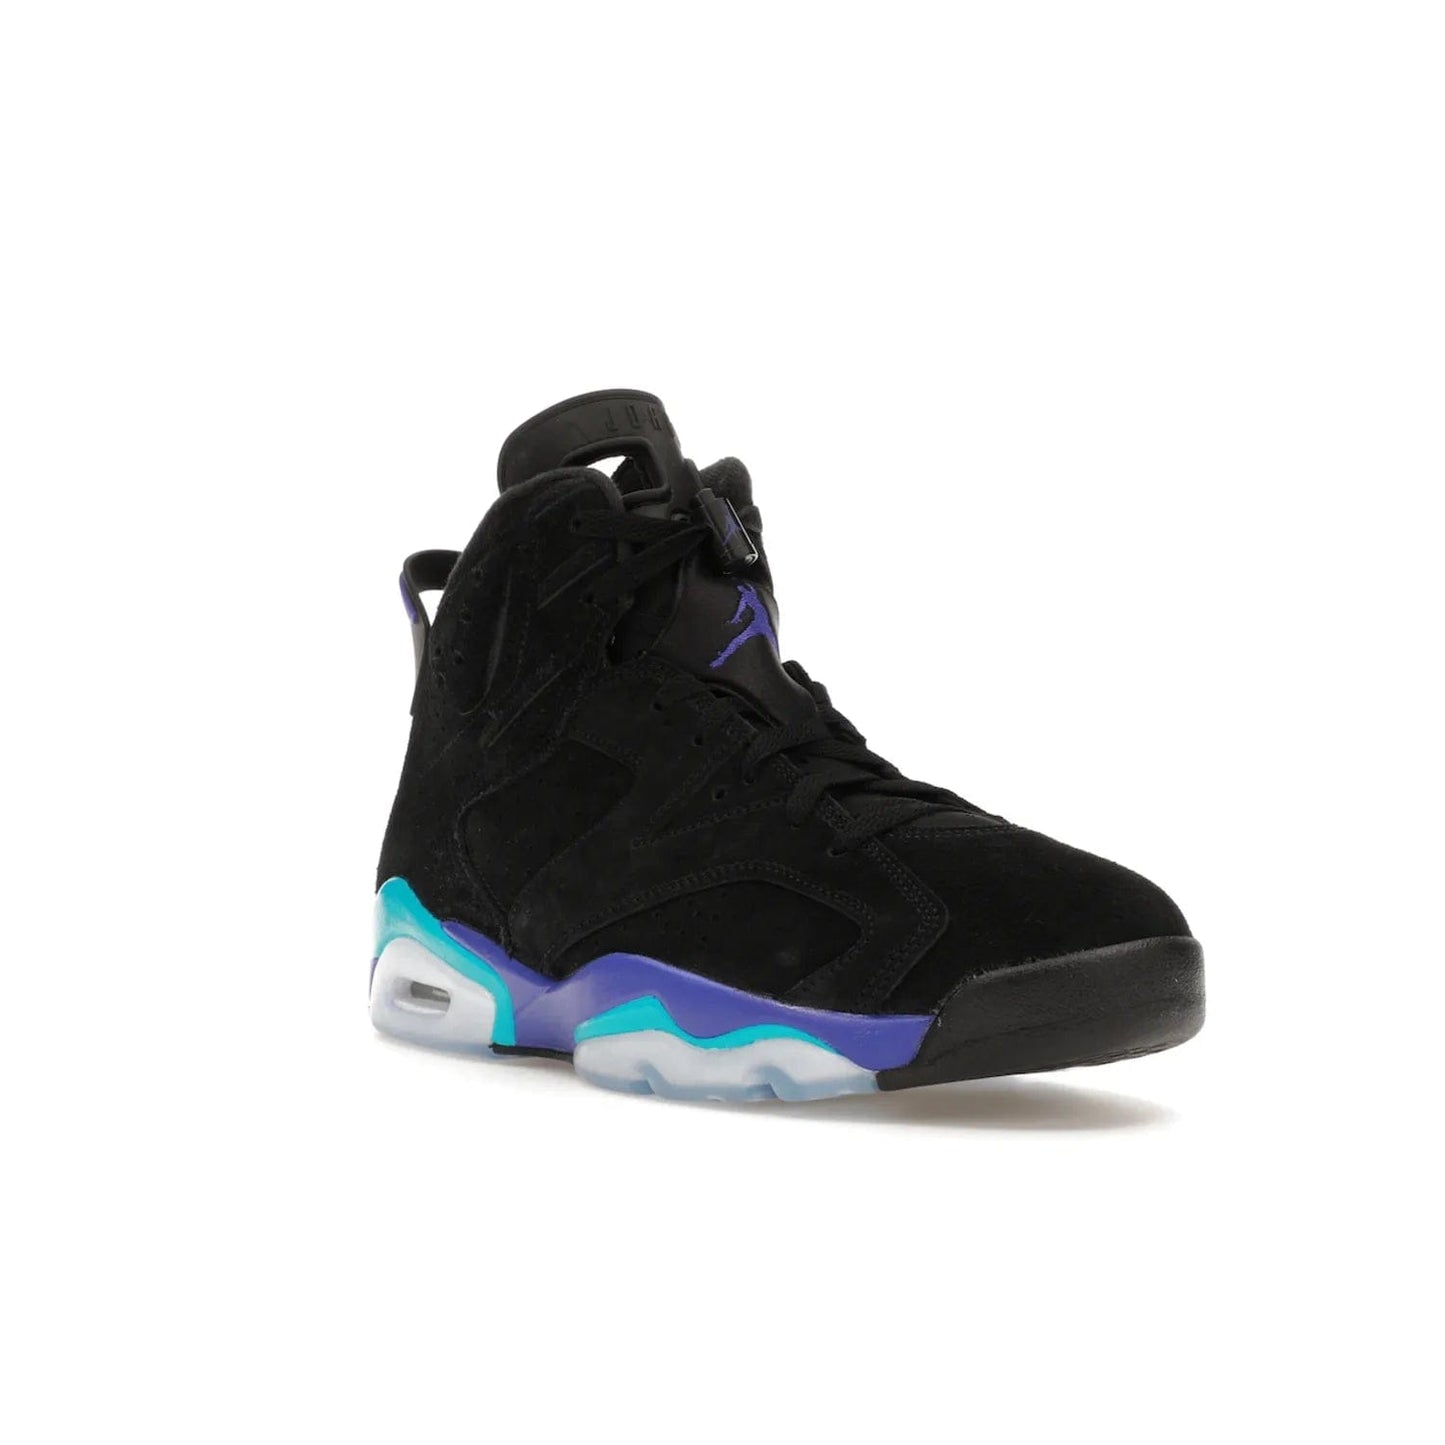 Jordan 6 Retro Aqua - Image 6 - Only at www.BallersClubKickz.com - Feel the classic Jordan 6 Retro Aqua paired with modern style. Black, Bright Concord, and Aquatone hues are crafted with a supple suede and rubberized heel tab. This standout sneaker adds signature Jordan elements at $200. Elevate your style with the Jordan 6 Retro Aqua.